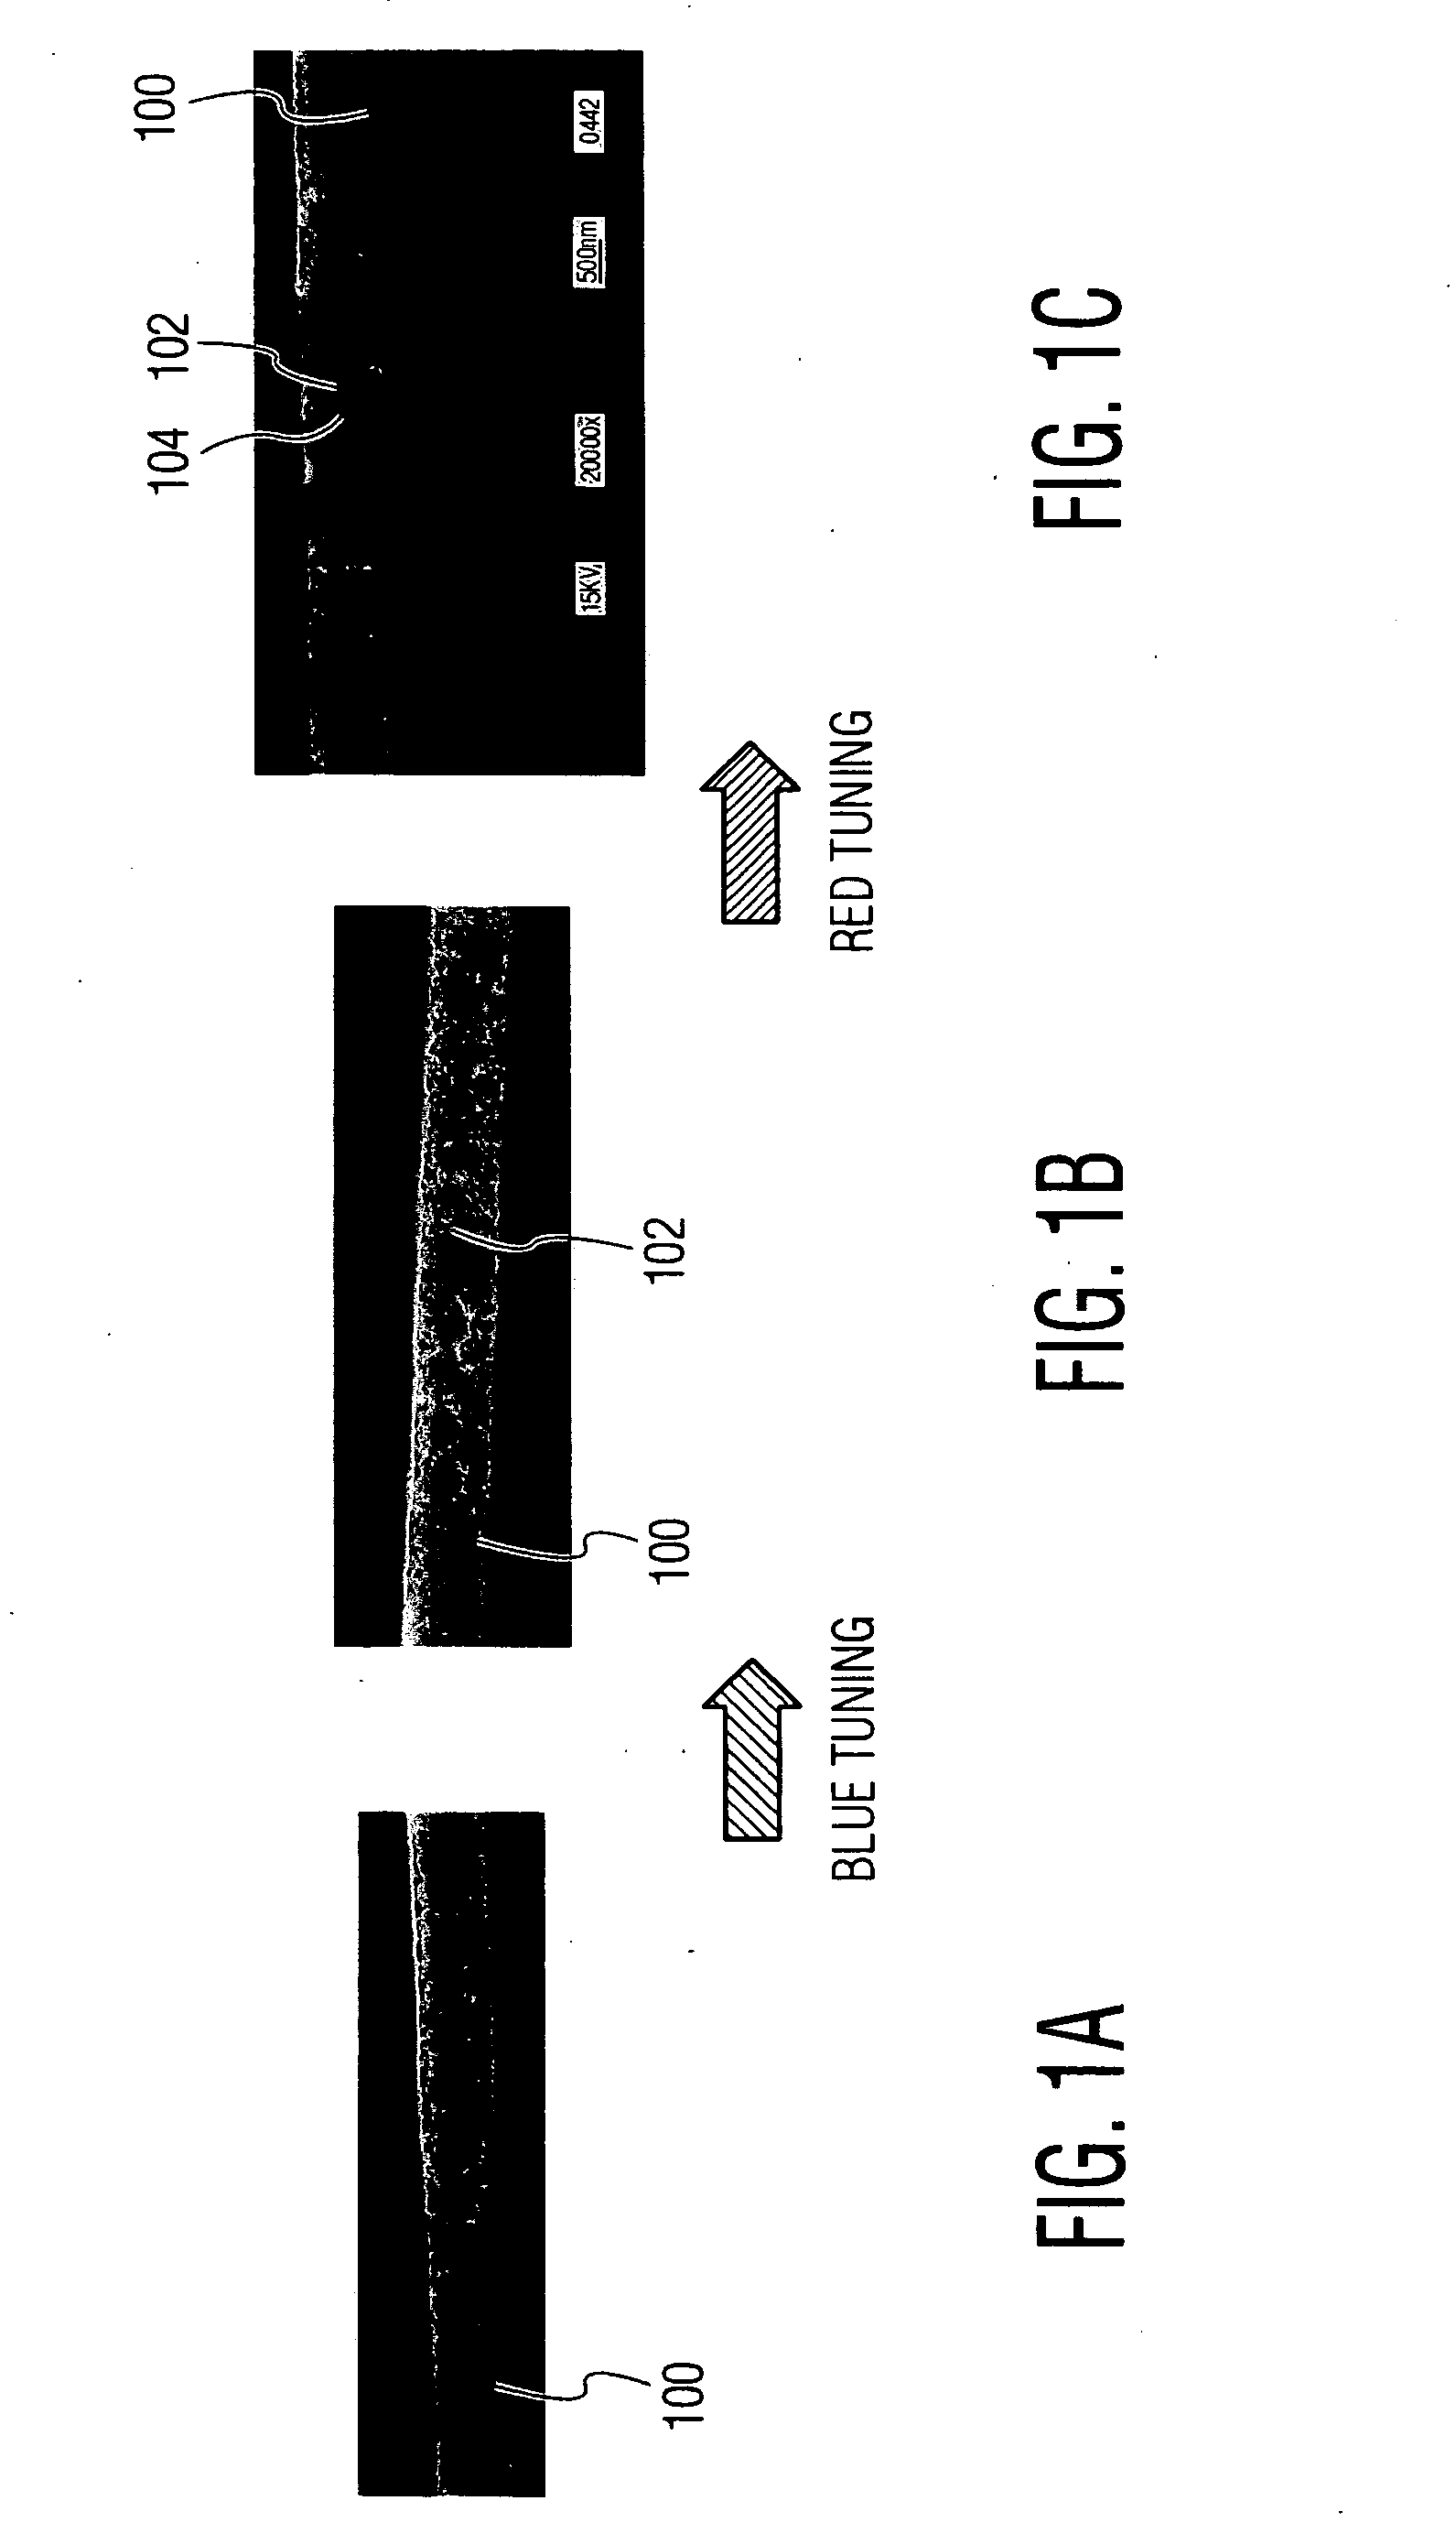 Precision resonance frequency tuning method for photonic crystal structures